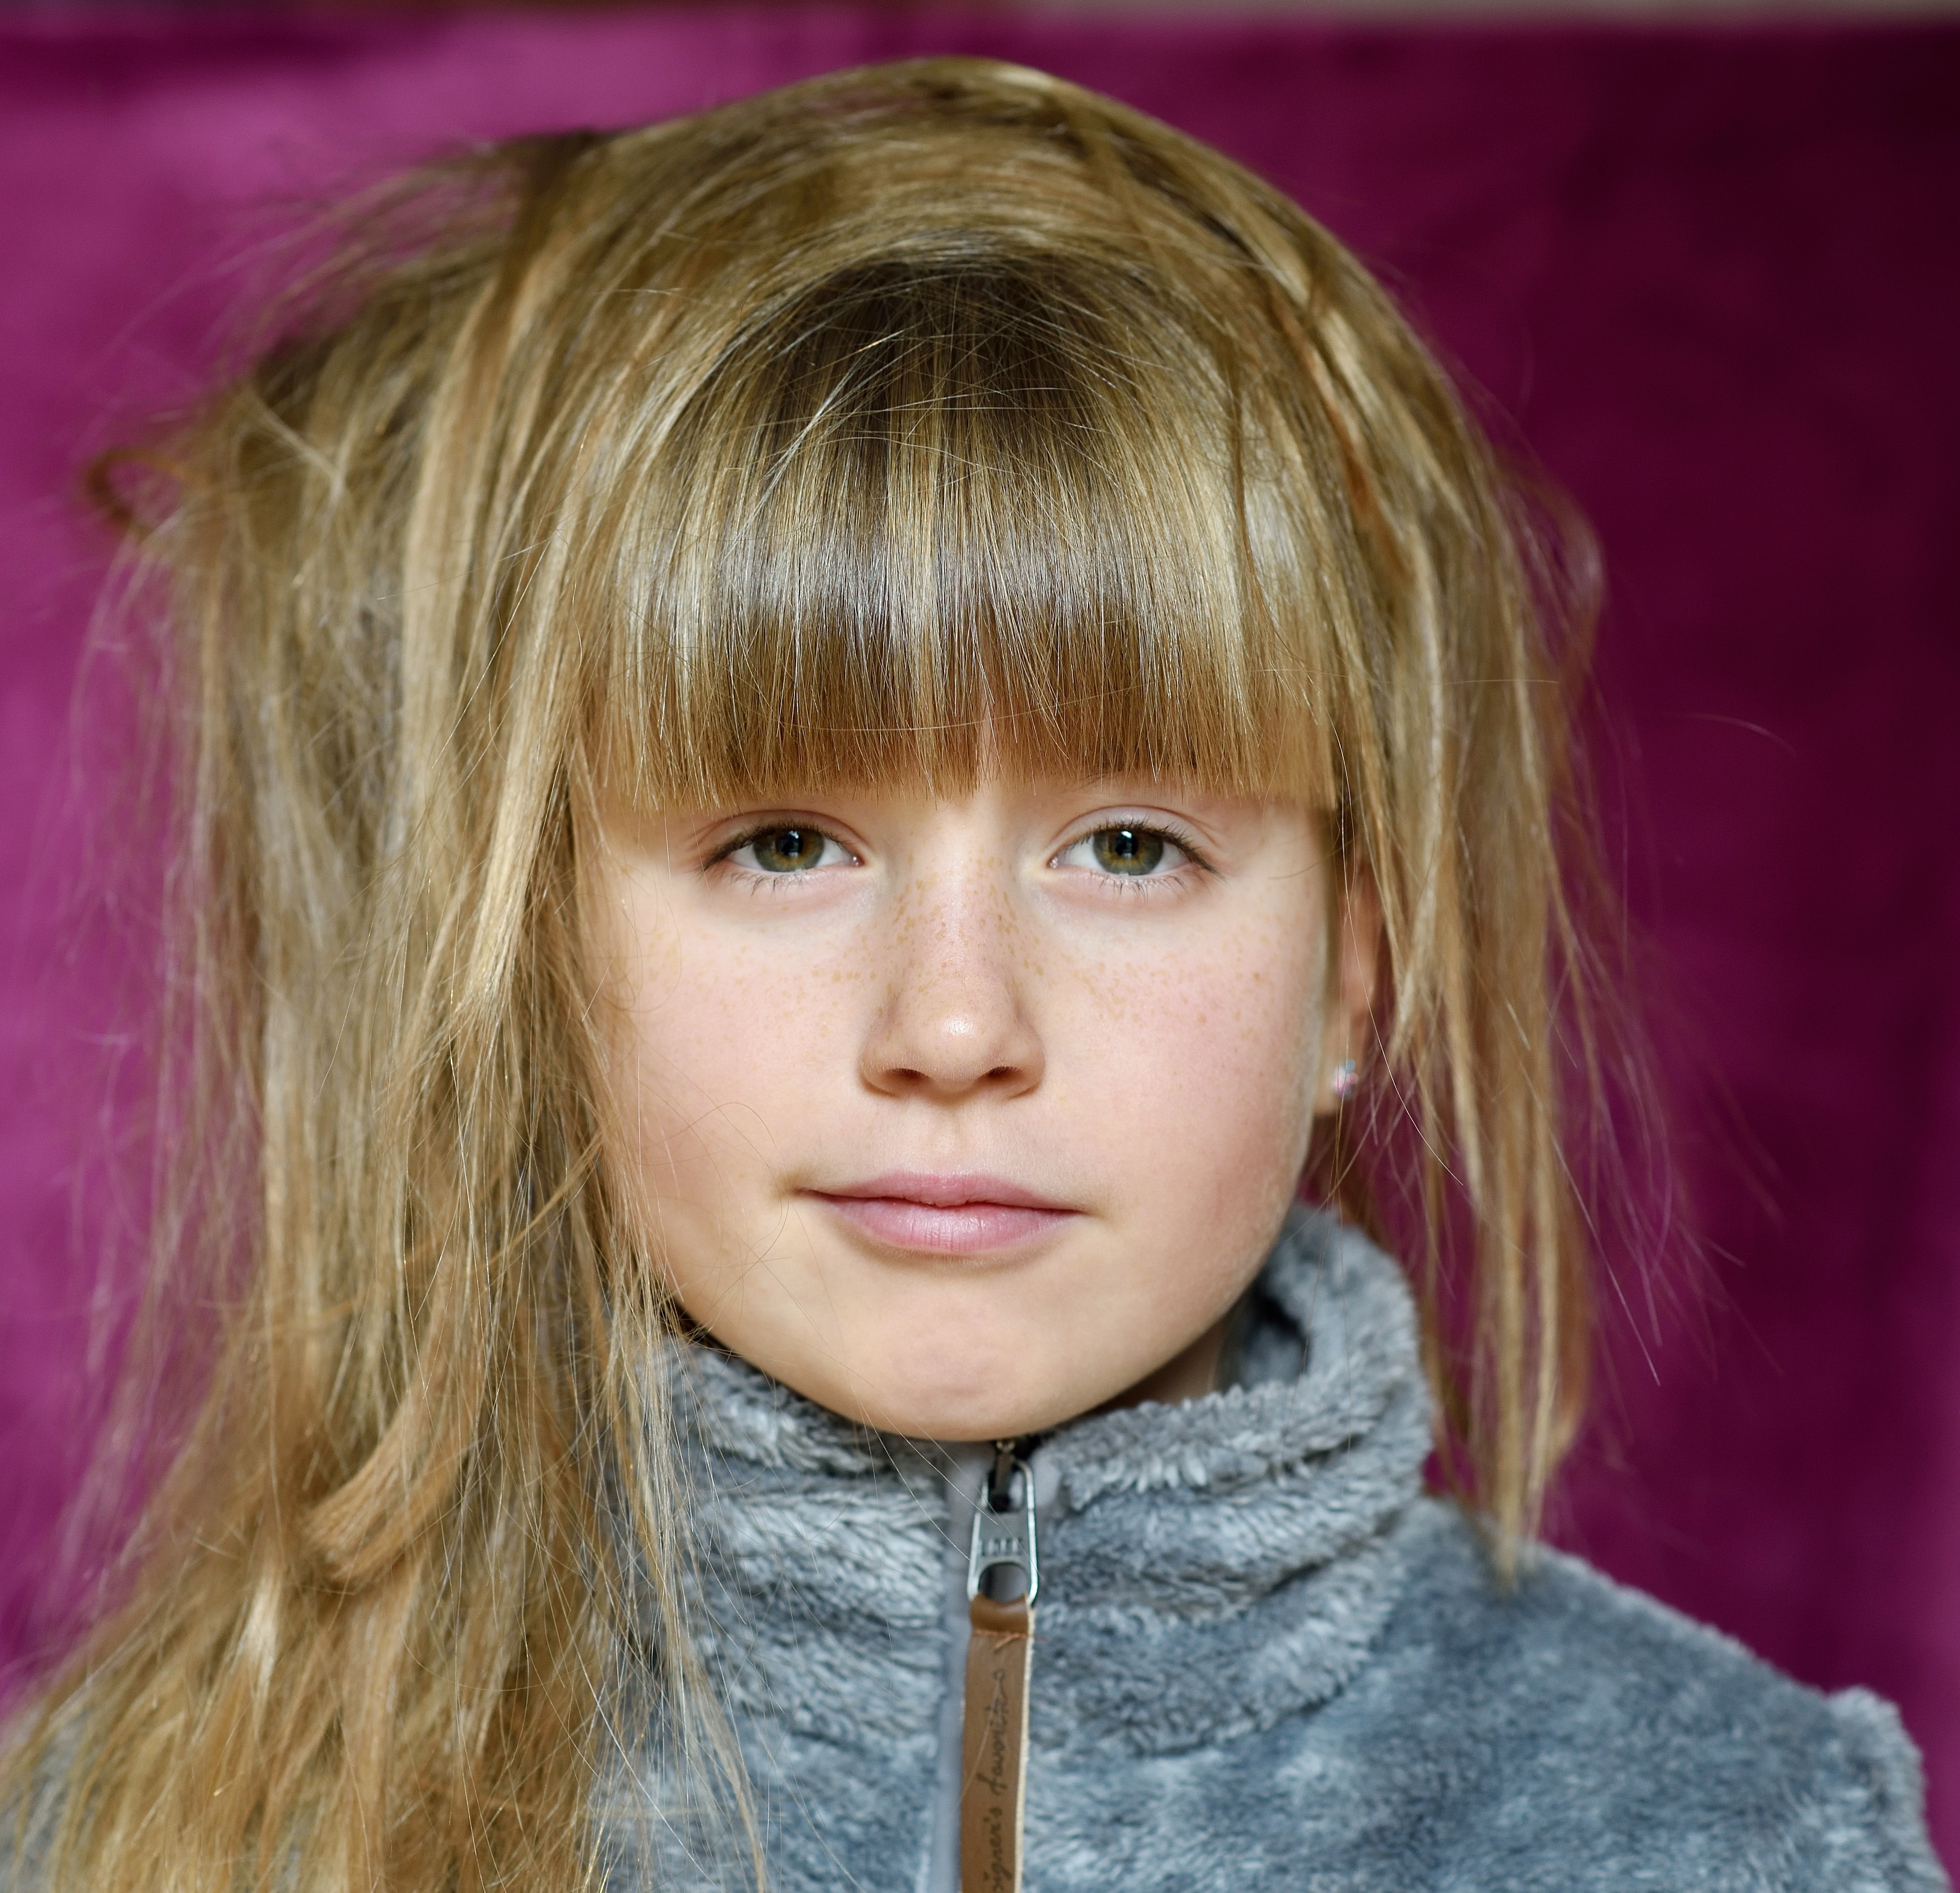 View, Face, Expression, Girl, Child, blond hair, children only